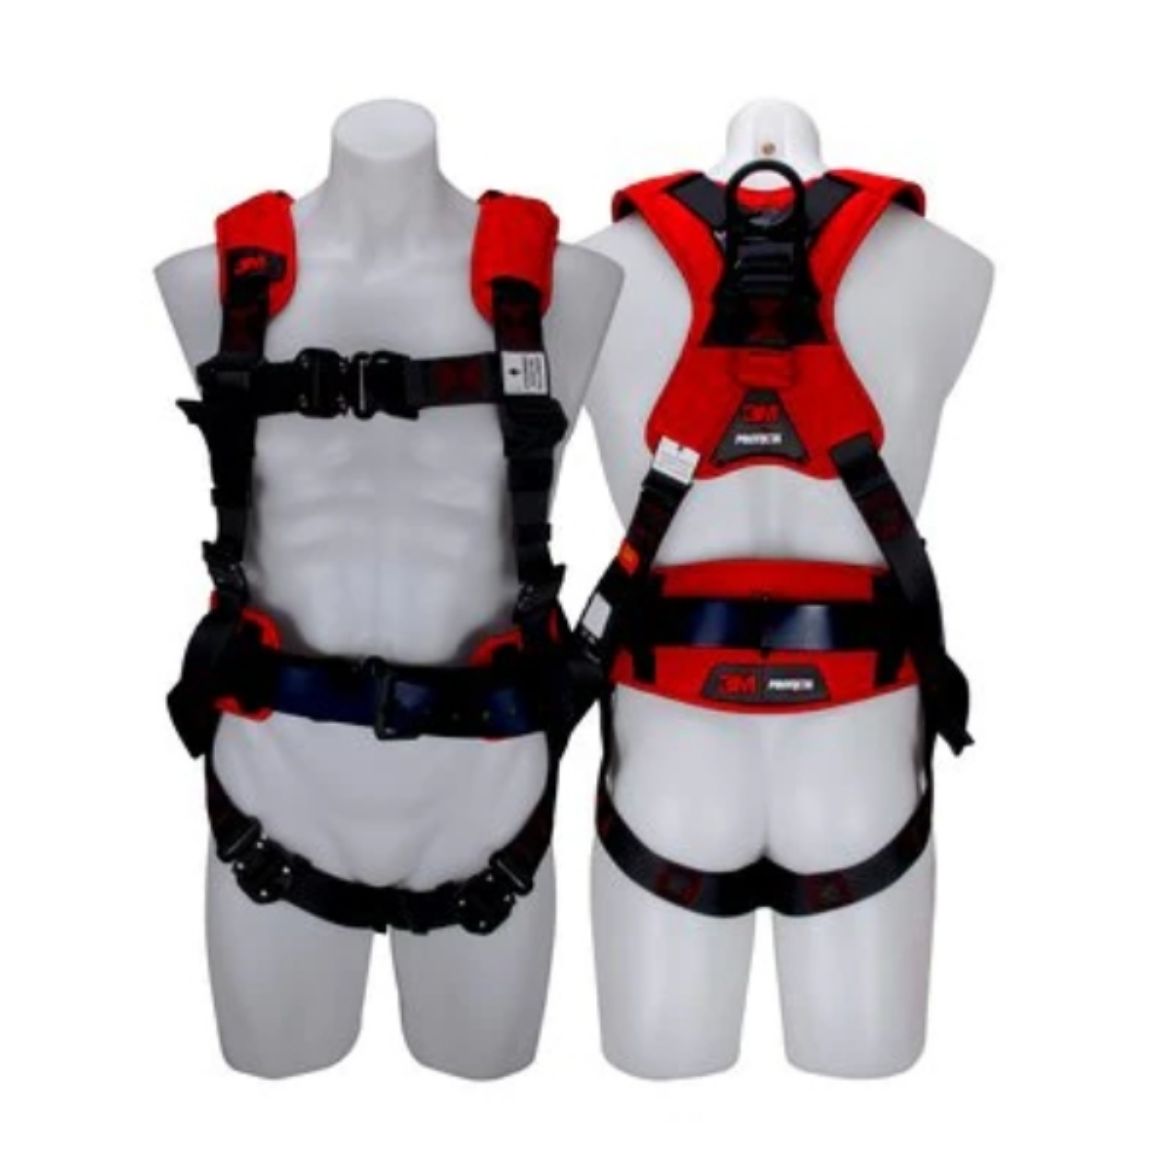 Picture of 1161684 3M™ PROTECTA® P200 MINERS HARNESS WITH PADDING - SMALL